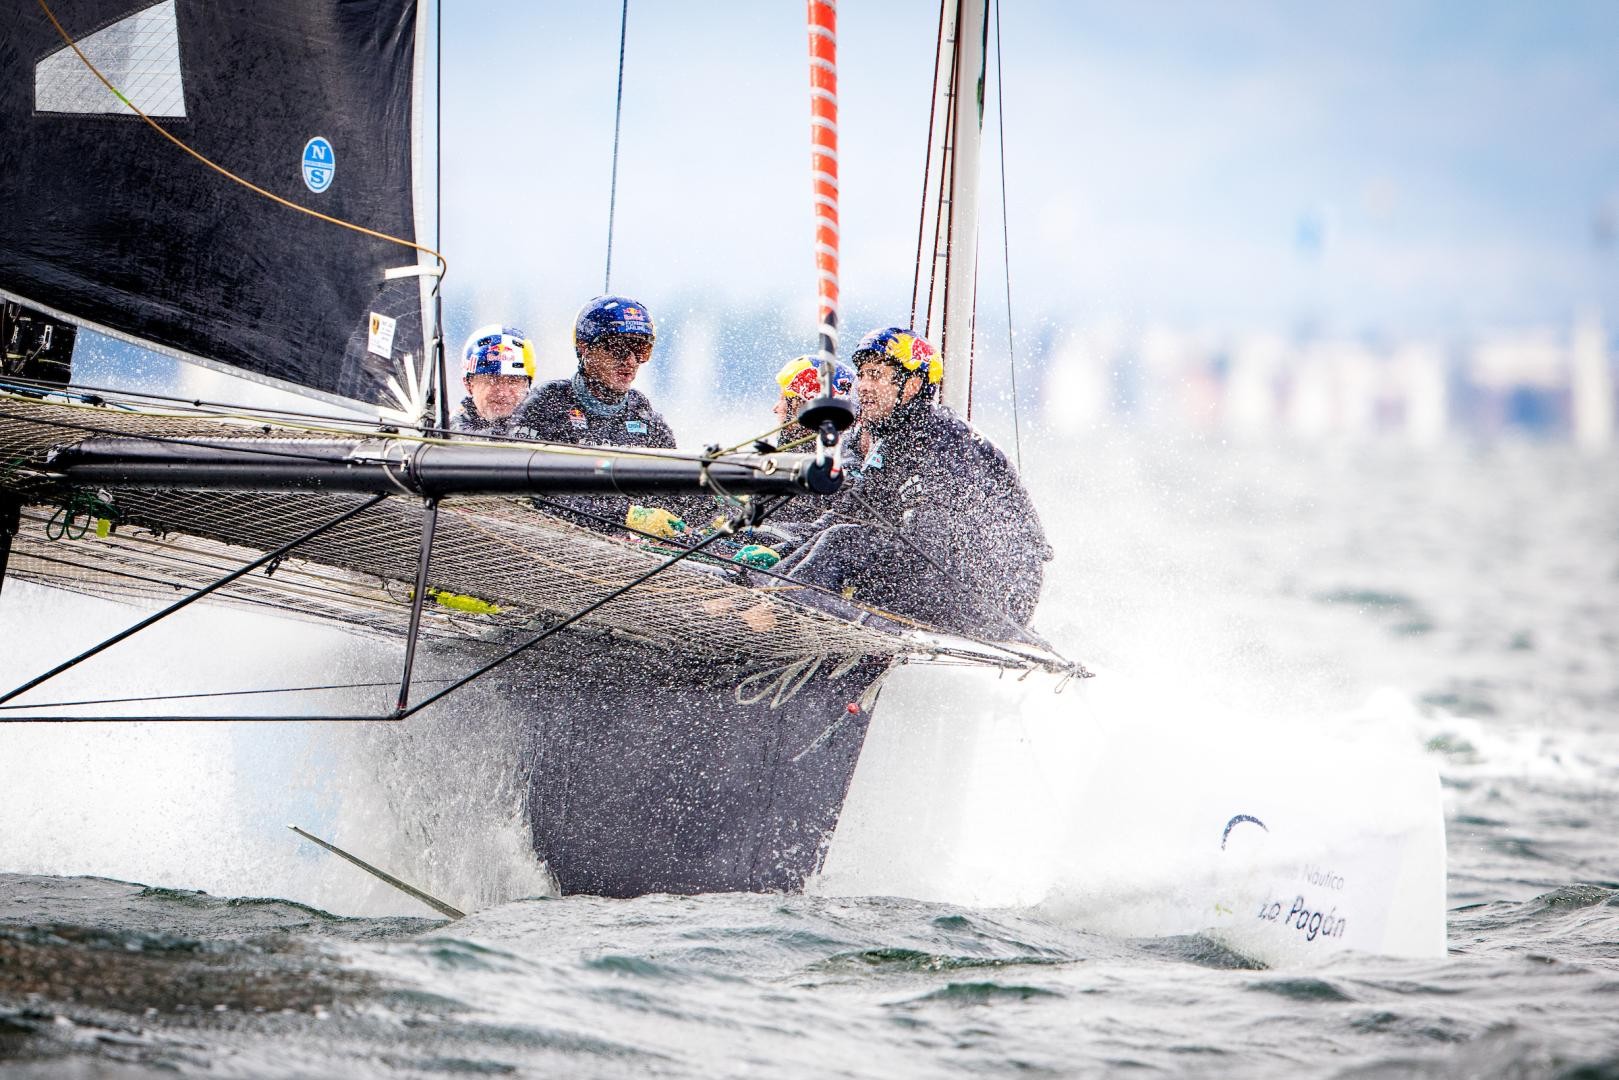 Red Bull Sailing Team were on form today. Photos: Sailing Energy / GC32 Racing Tour